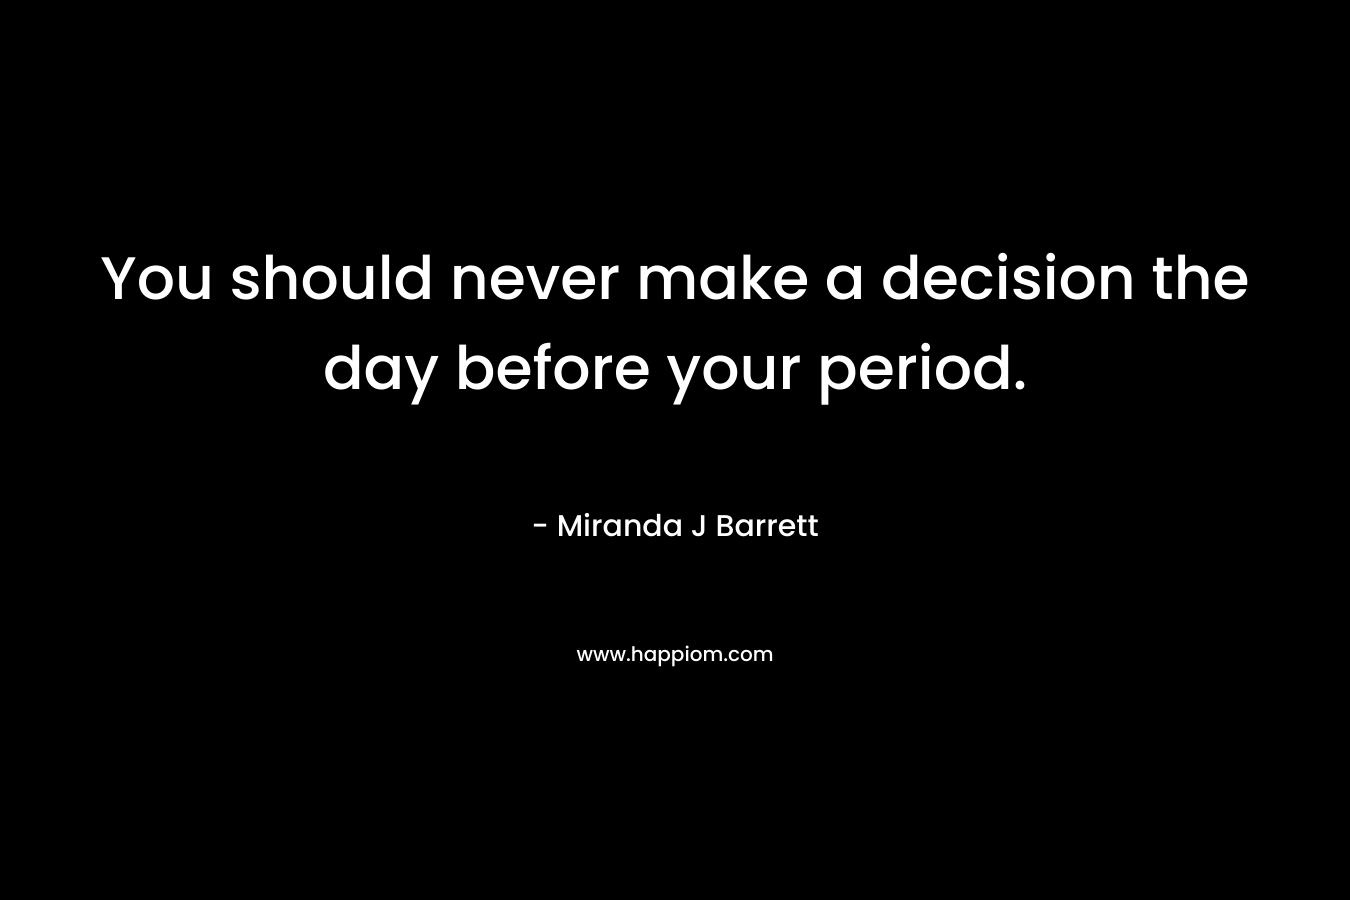 You should never make a decision the day before your period.